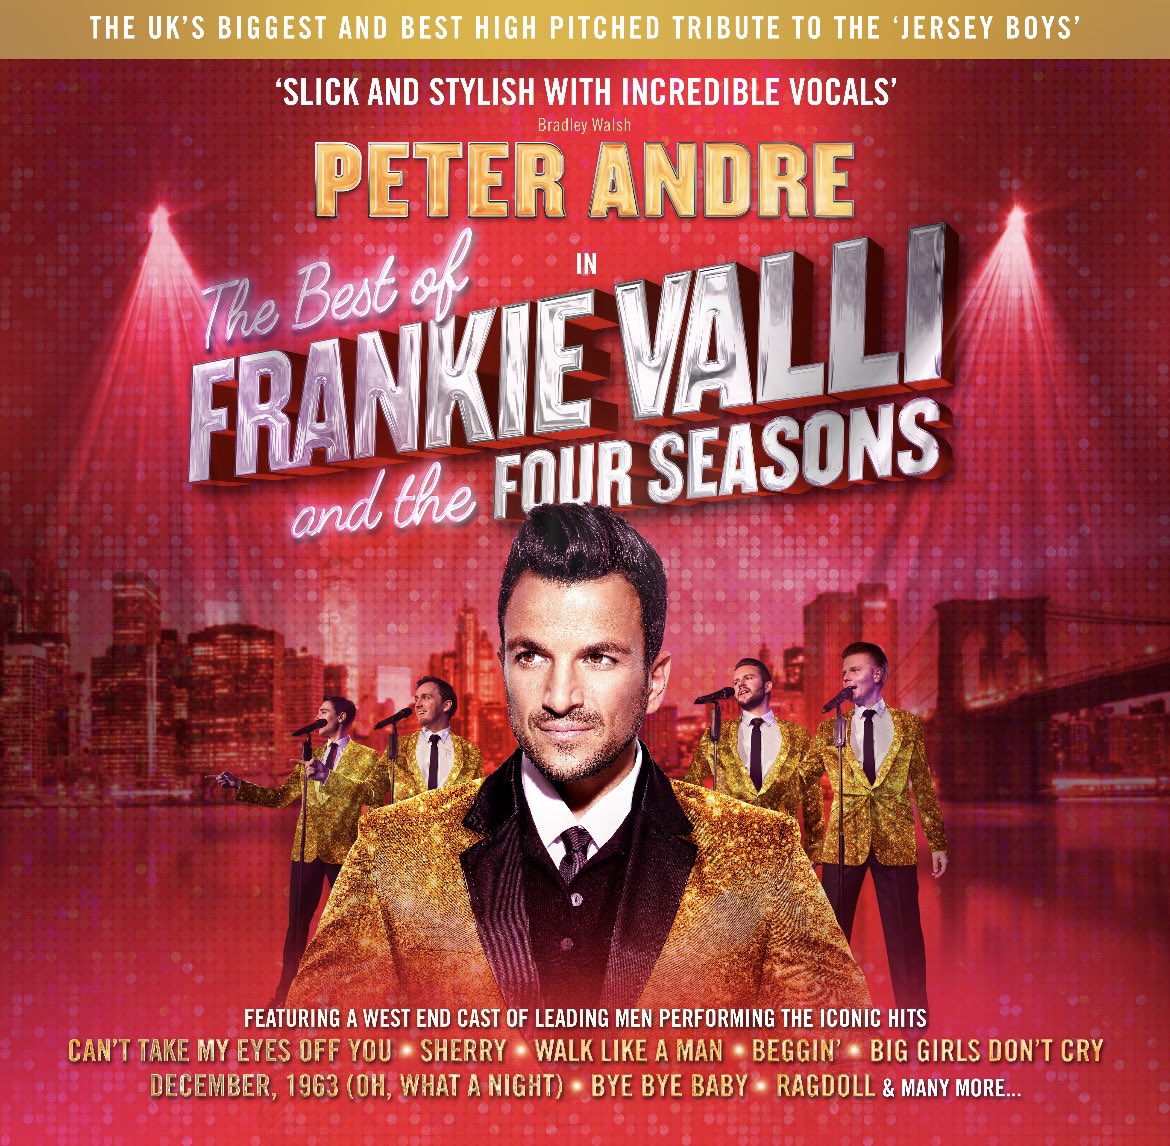 *ON SALE NOW* Sweeney Entertainments present Peter Andre in The Best of Frankie Valli and the Four Seasons. This high-pitched celebration of timeless music from one of the biggest selling groups of all time! Tickets at: assemblyhalltheatre.co.uk/whats-on/peter… @FourSeasonsShow